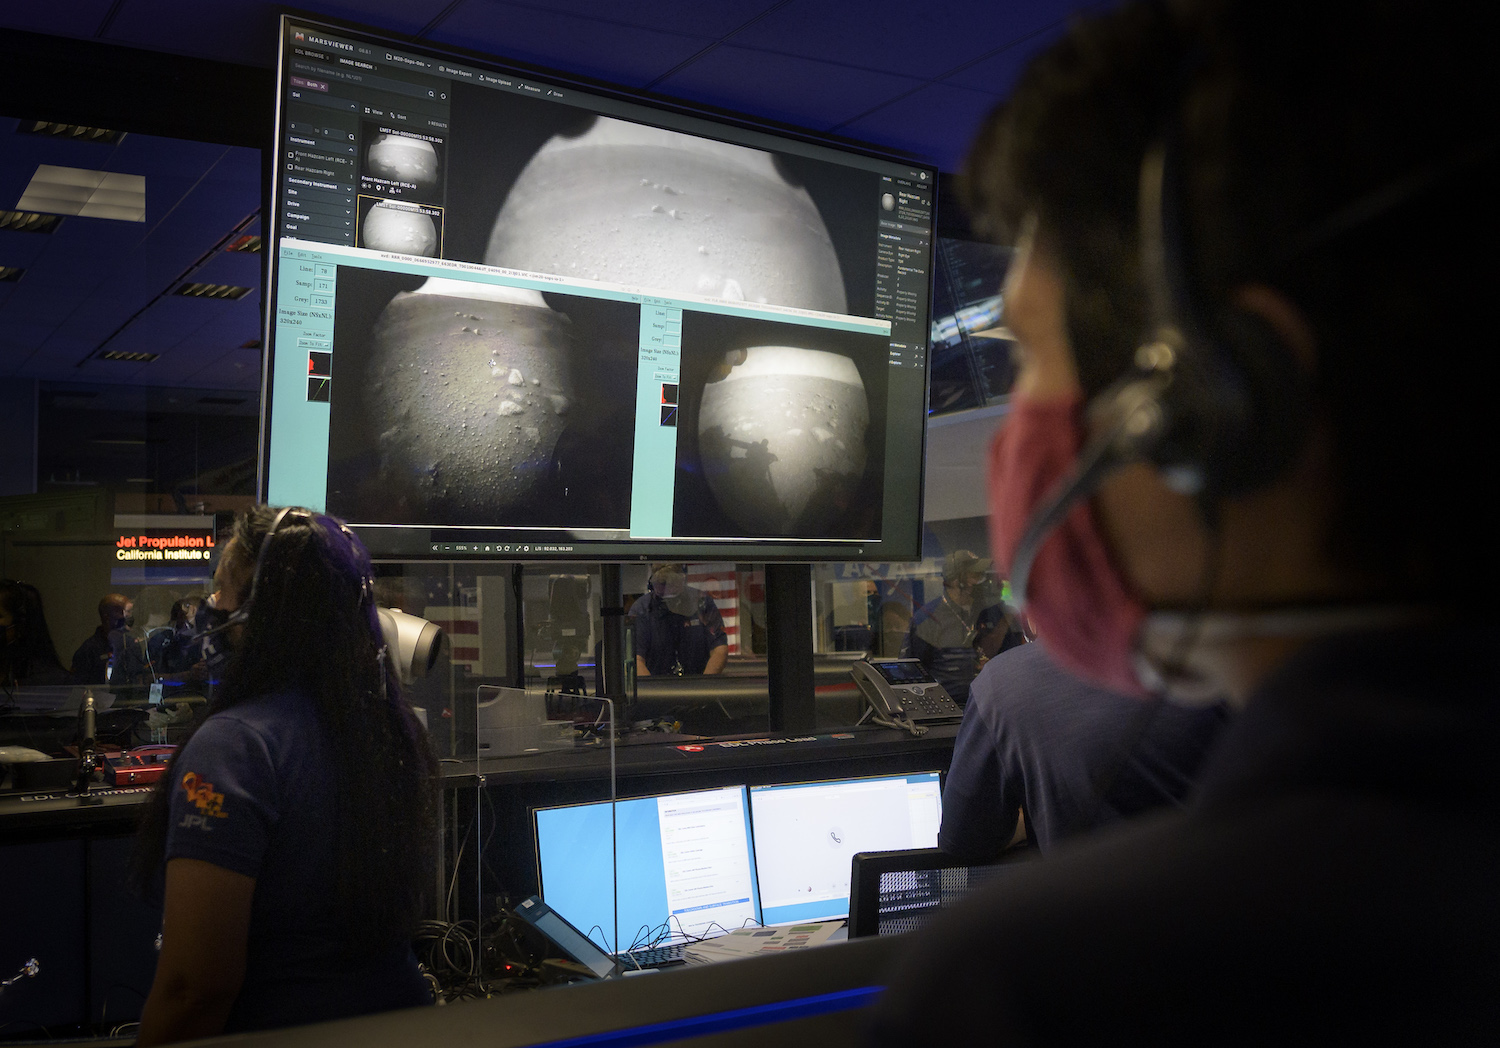 Members of NASA’s Perseverance Mars rover team watch in mission control as the first images arrive moments after the spacecraft successfully touched down on Mars, Thursday, Feb. 18, 2021, at NASA’s Jet Propulsion Laboratory in Pasadena, California. © NASA/Bill Ingalls.